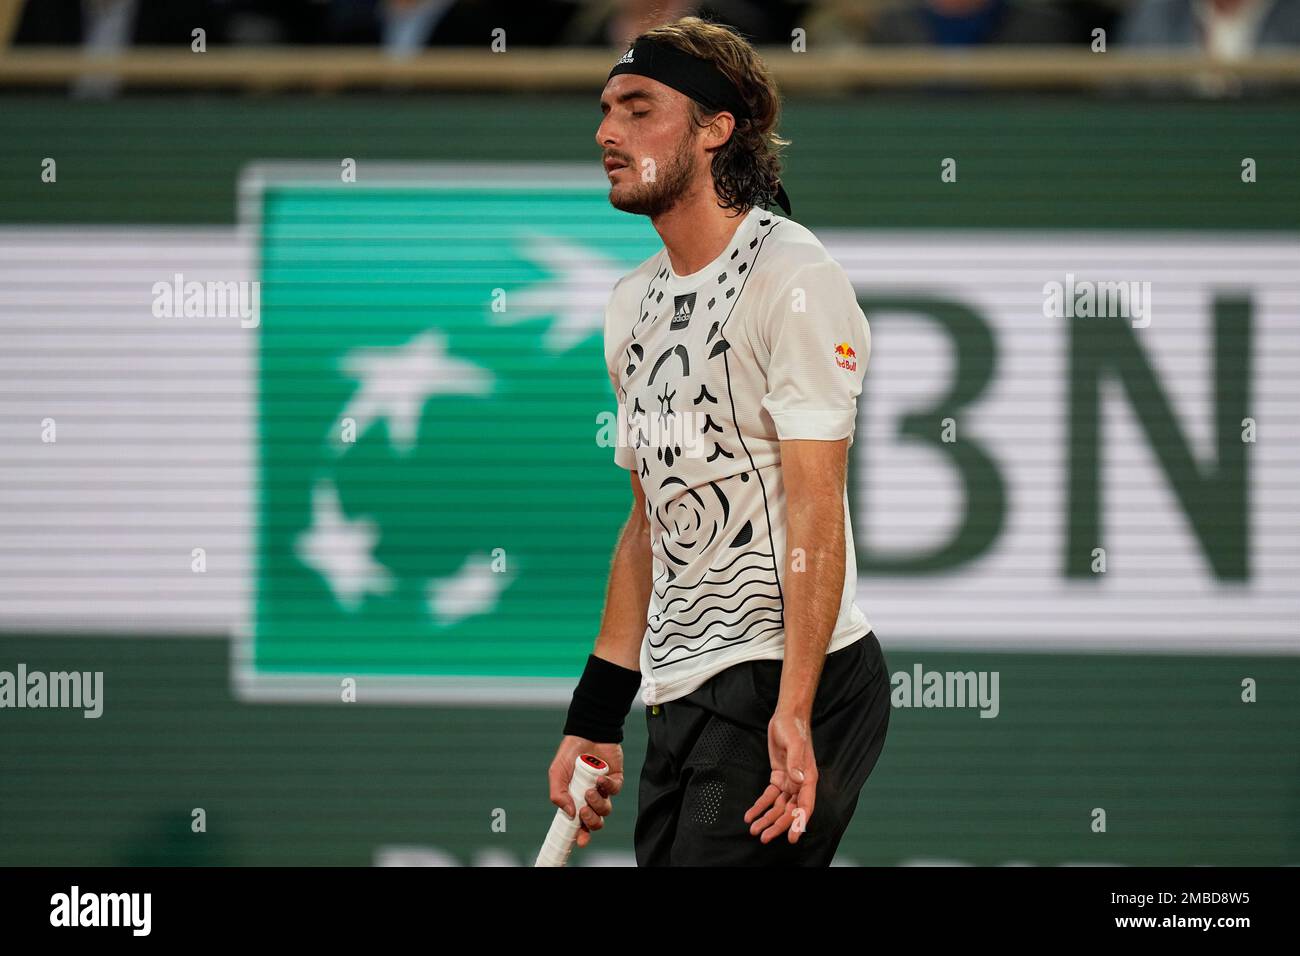 Greeces Stefanos Tsitsipas reacts as he plays Italys Lorenzo Musetti during their first round match of the French Open tennis tournament at the Roland Garros stadium Tuesday, May 24, 2022 in Paris